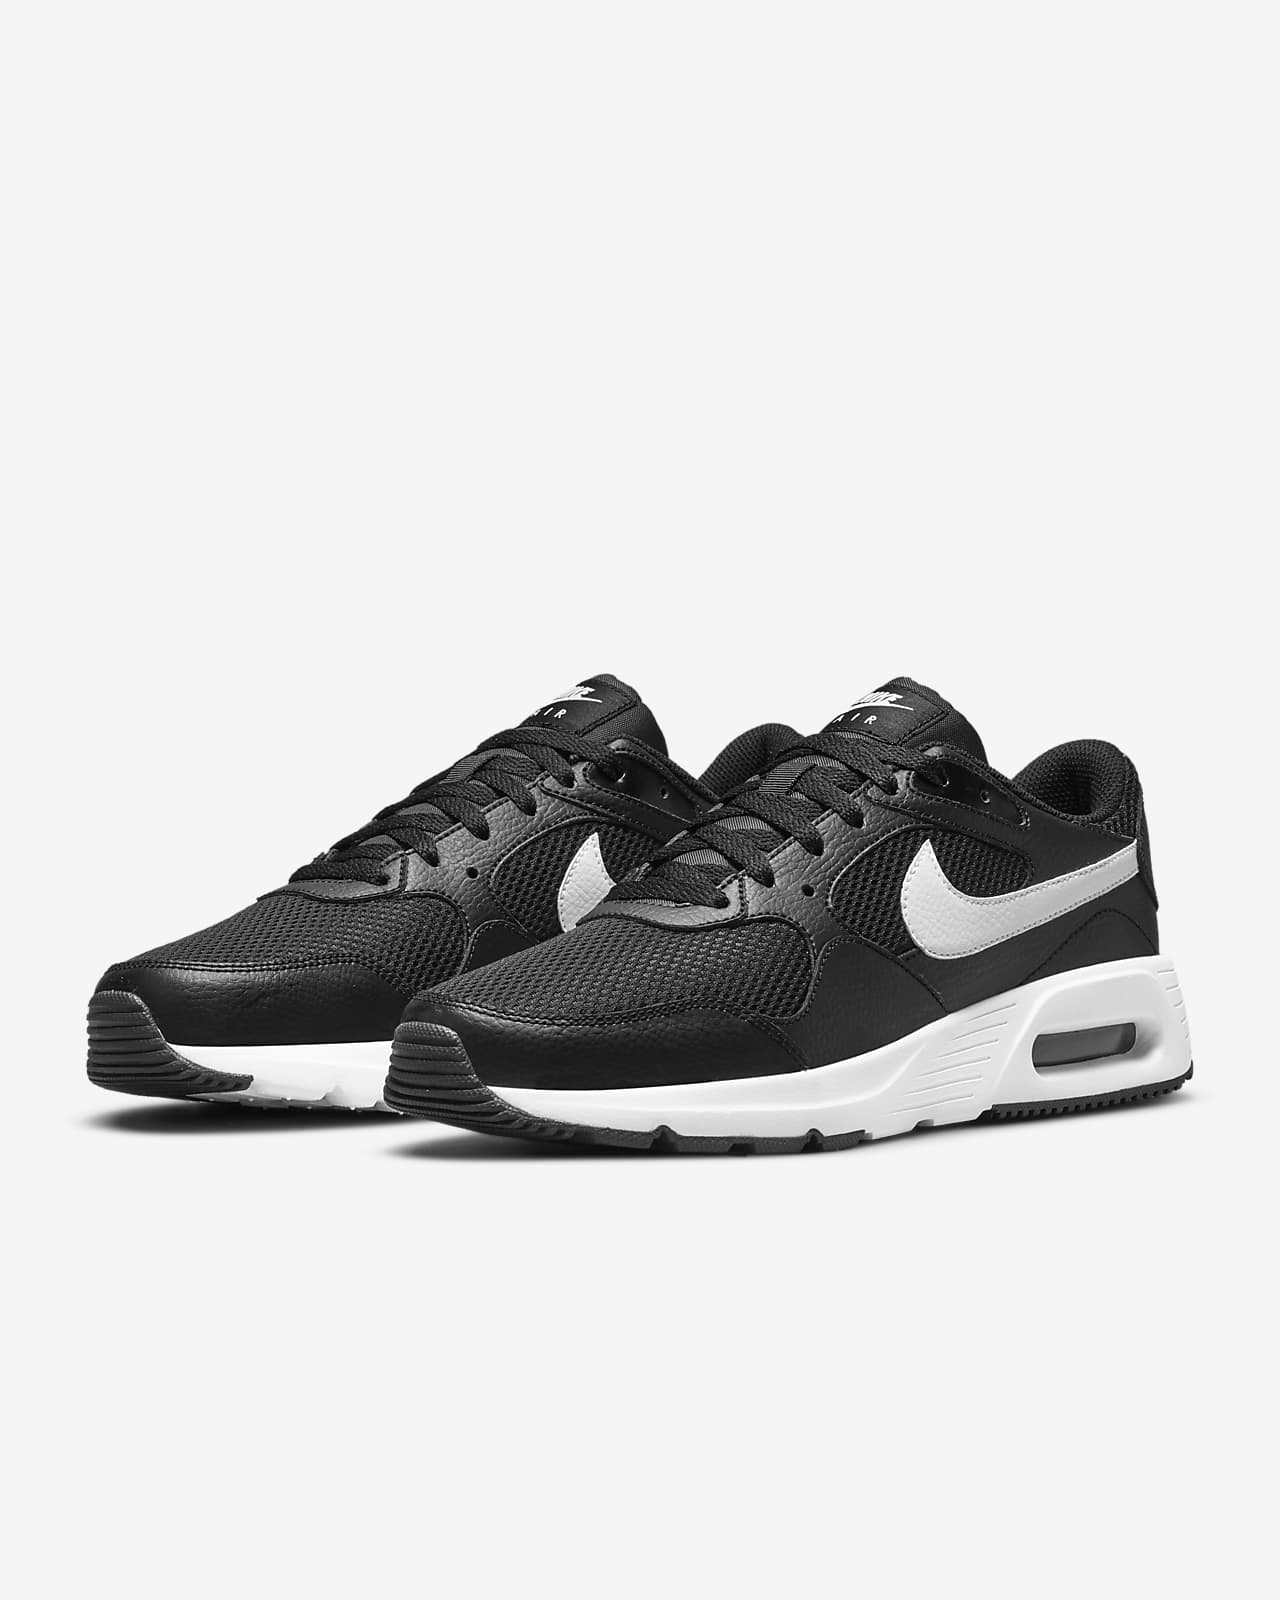 white and black nike air shoes